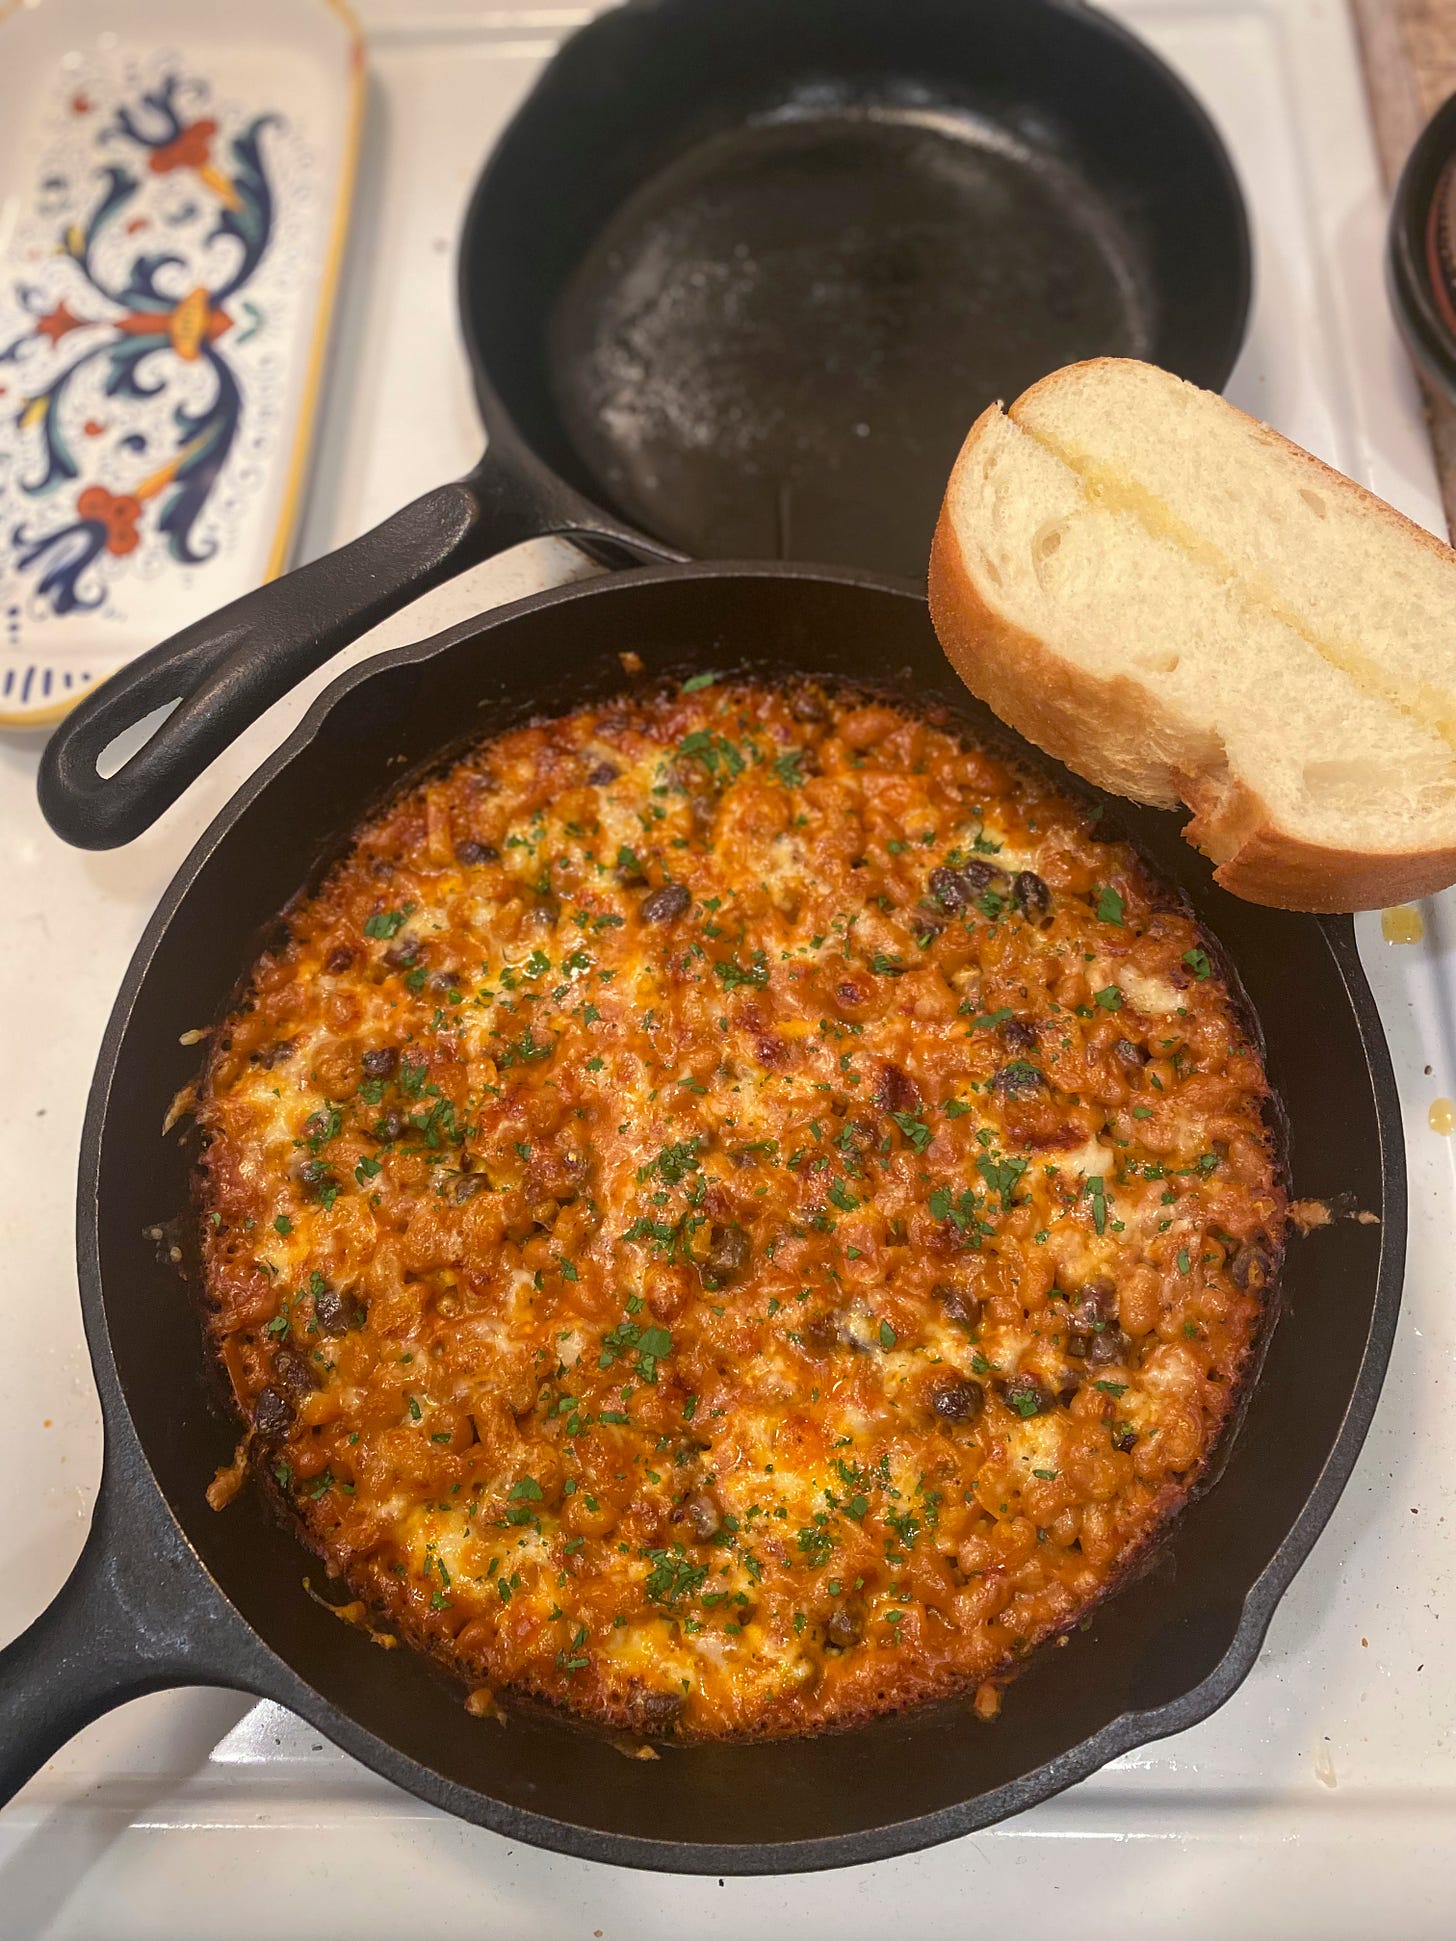 On top of the stove, a cast iron pan full of cheesy baked beans, sprinkled with parsley. A slice of garlic bread rests on the edge. Behind it is another smaller, empty cast iron pan, and a spoon rest with an artistic design in shades of blue, yellow, and orange.